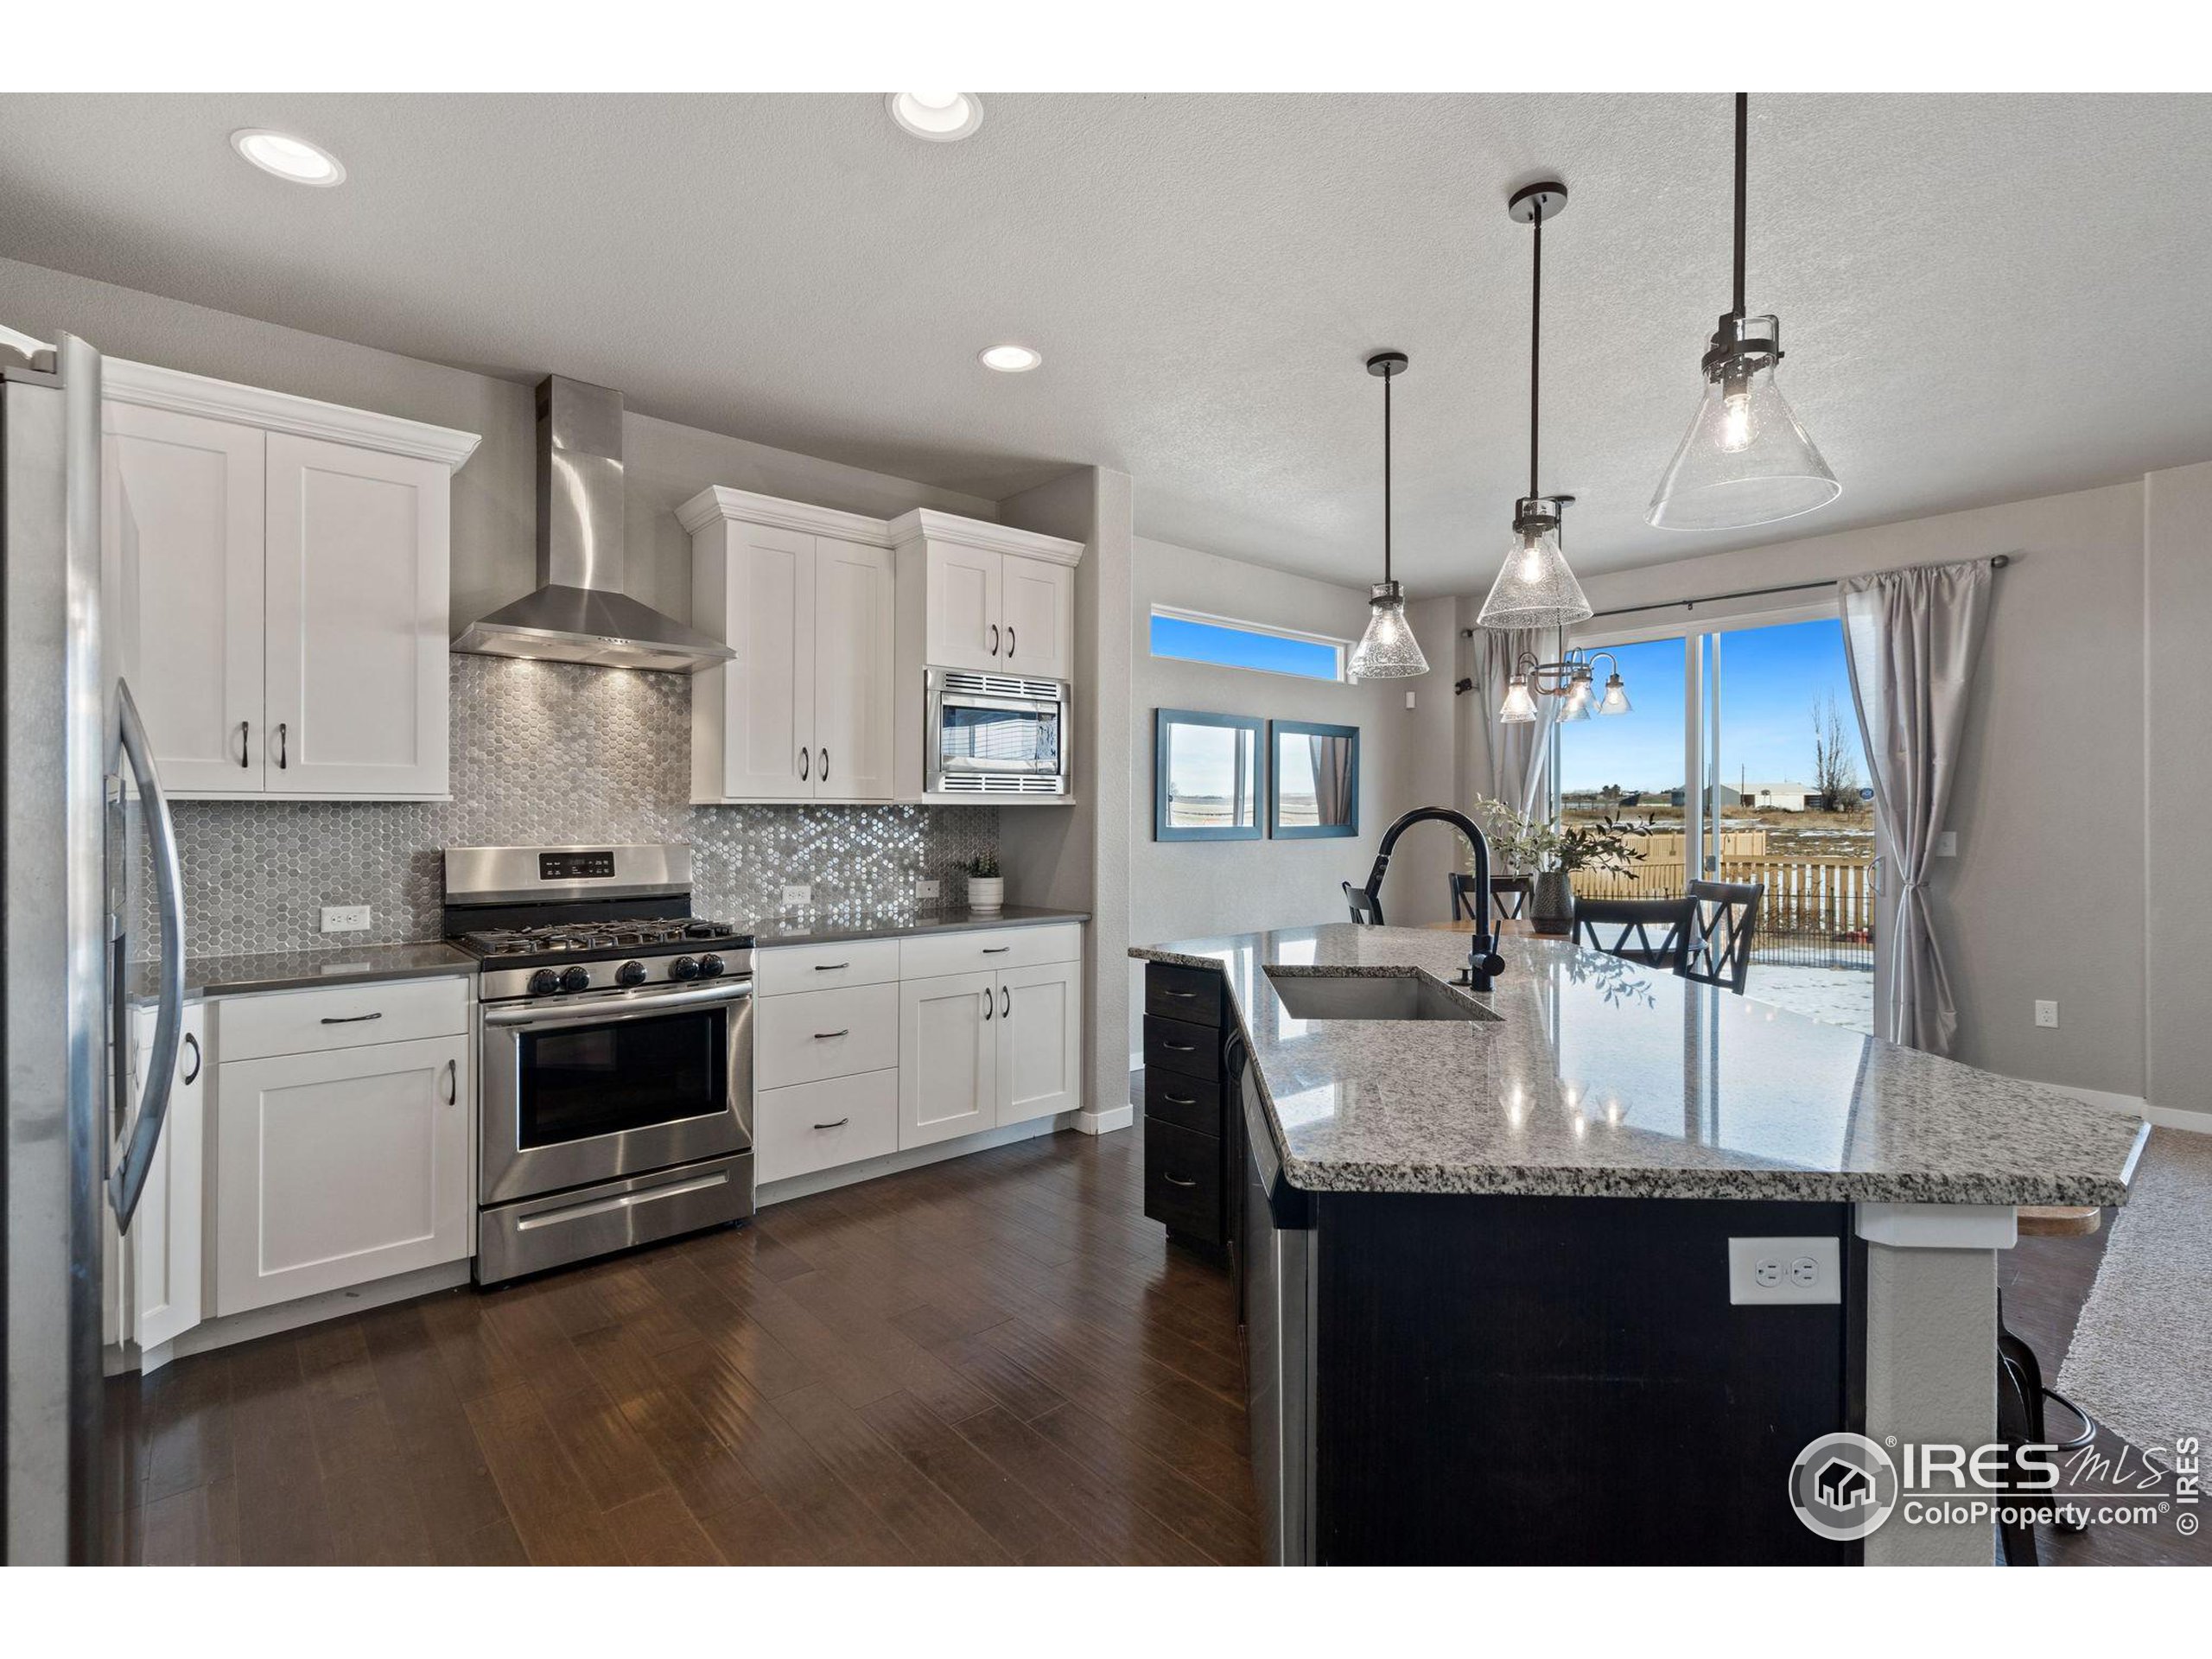 a kitchen with kitchen island granite countertop a stove a sink dishwasher and white cabinets with wooden floor